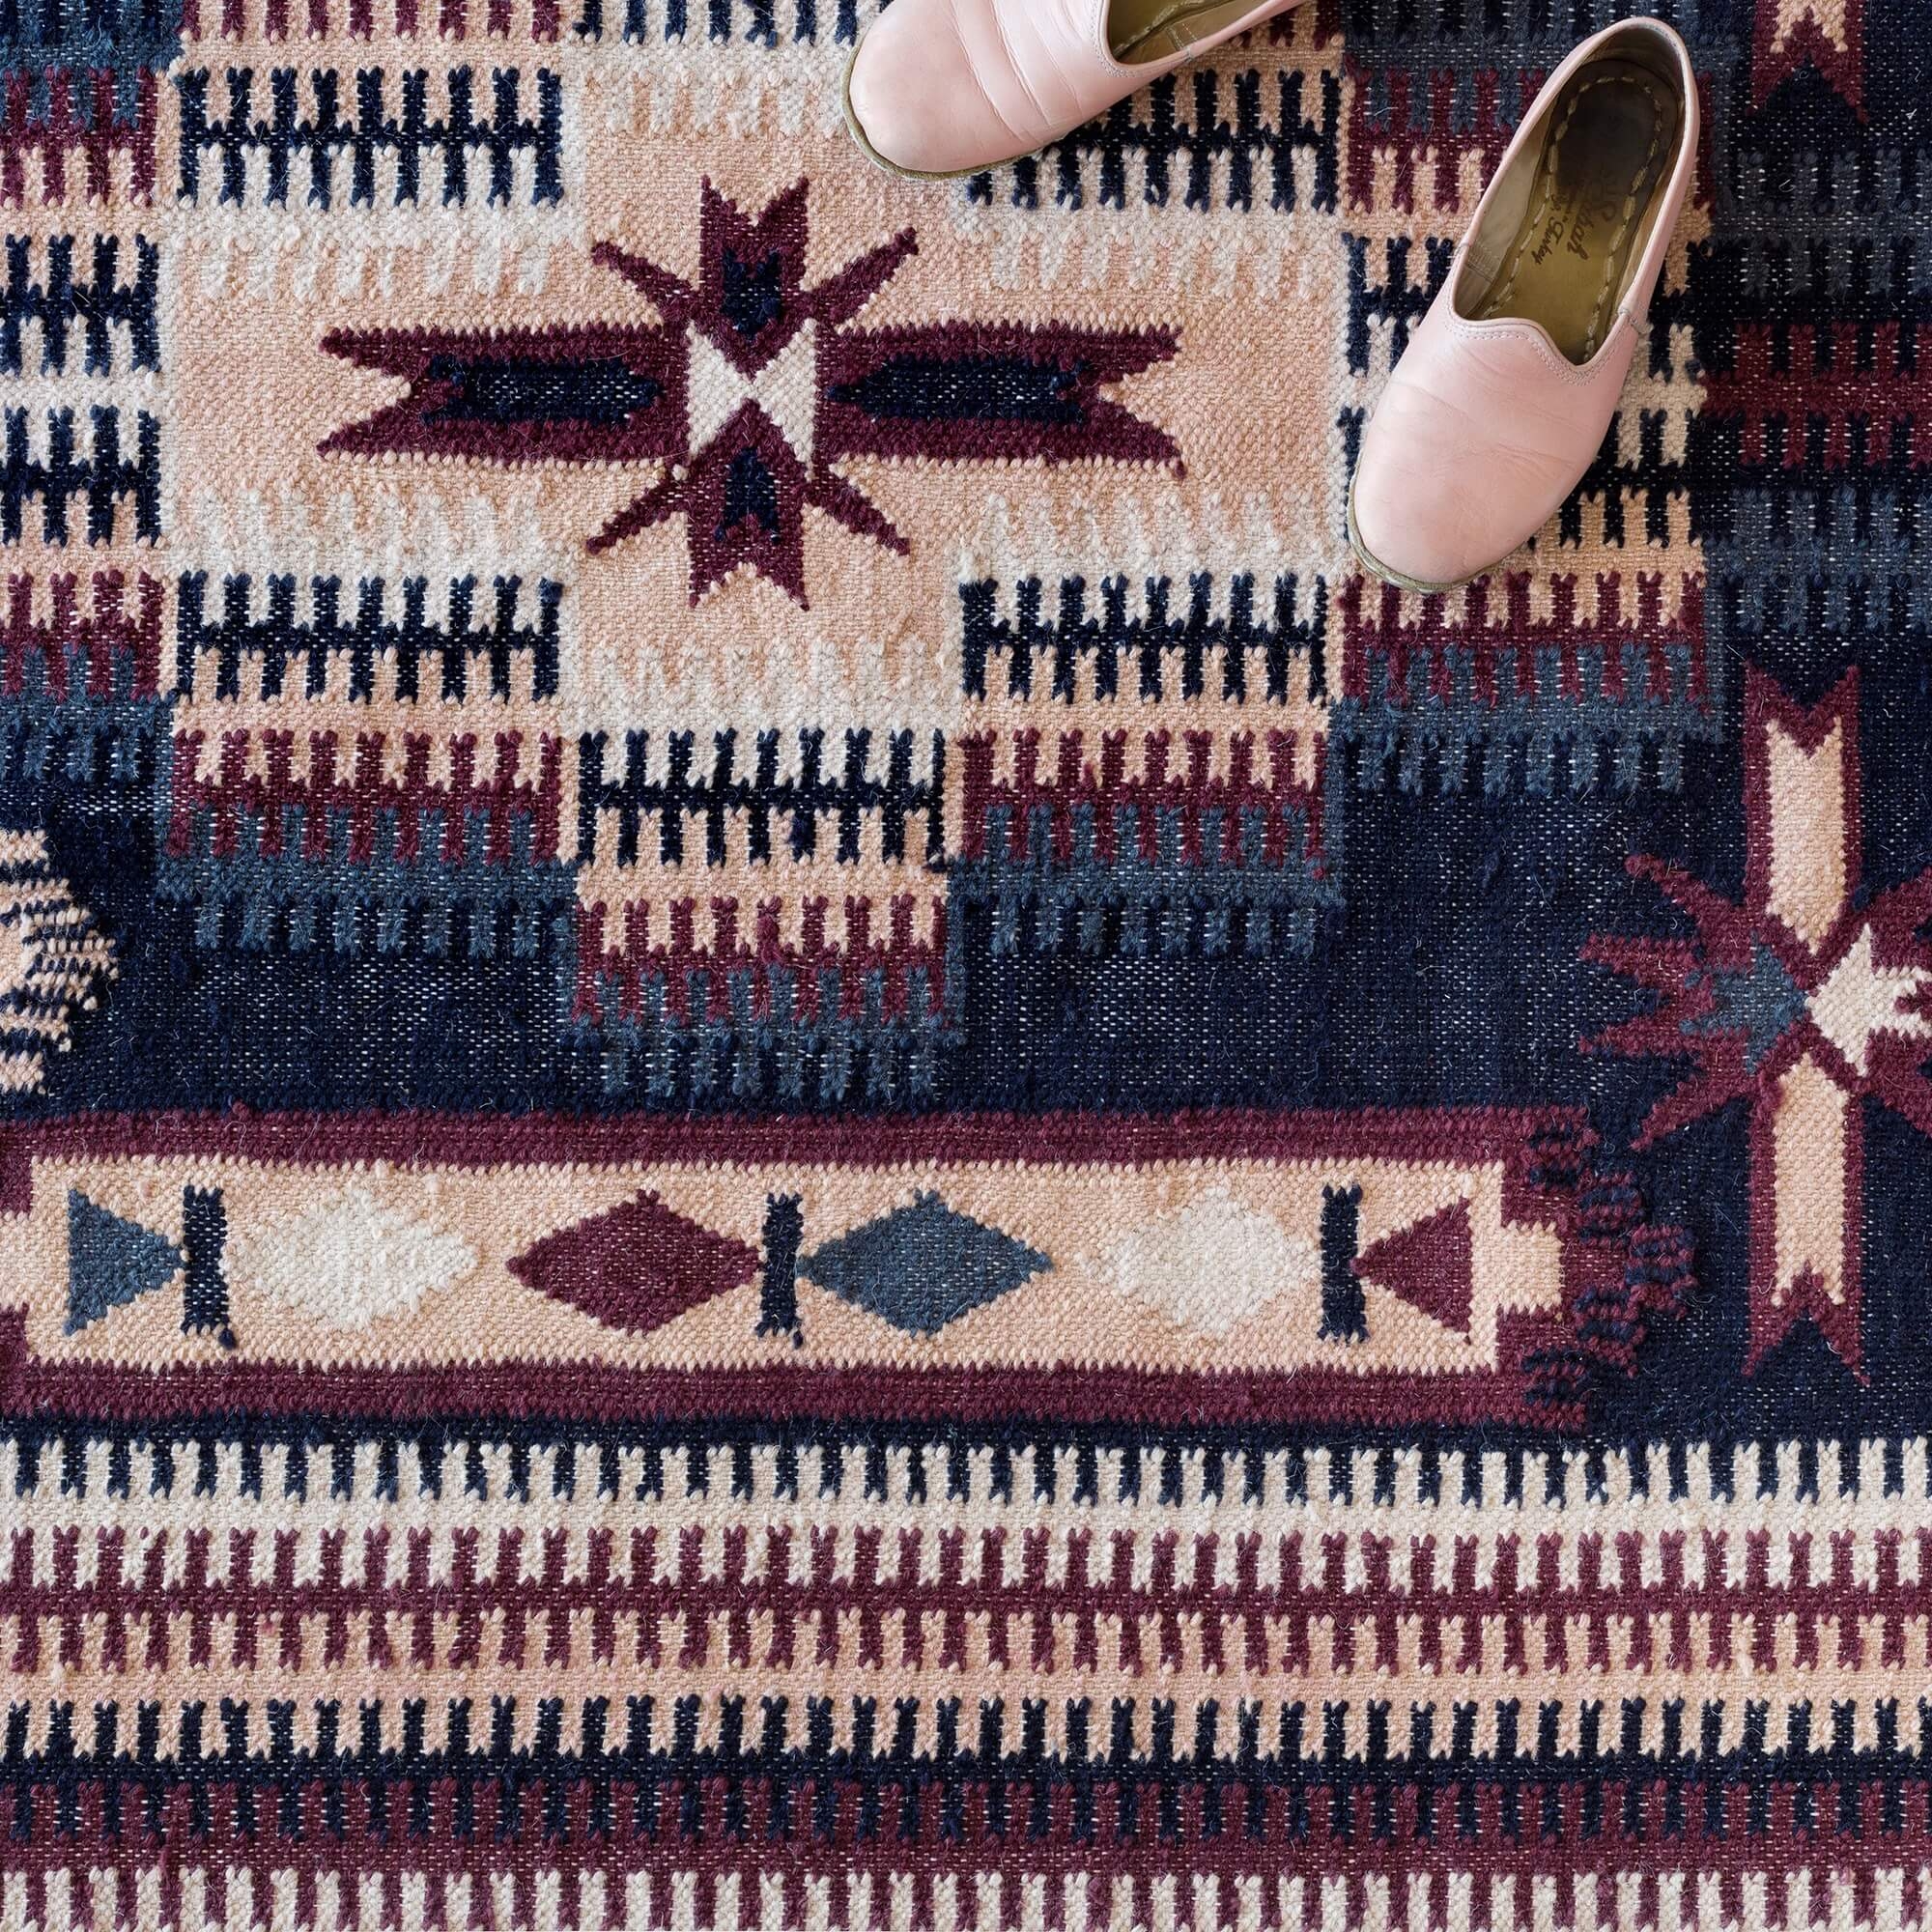 The Citizenry Keya Handwoven Area Rug | 6' x 9' | Made You Blush - Image 3